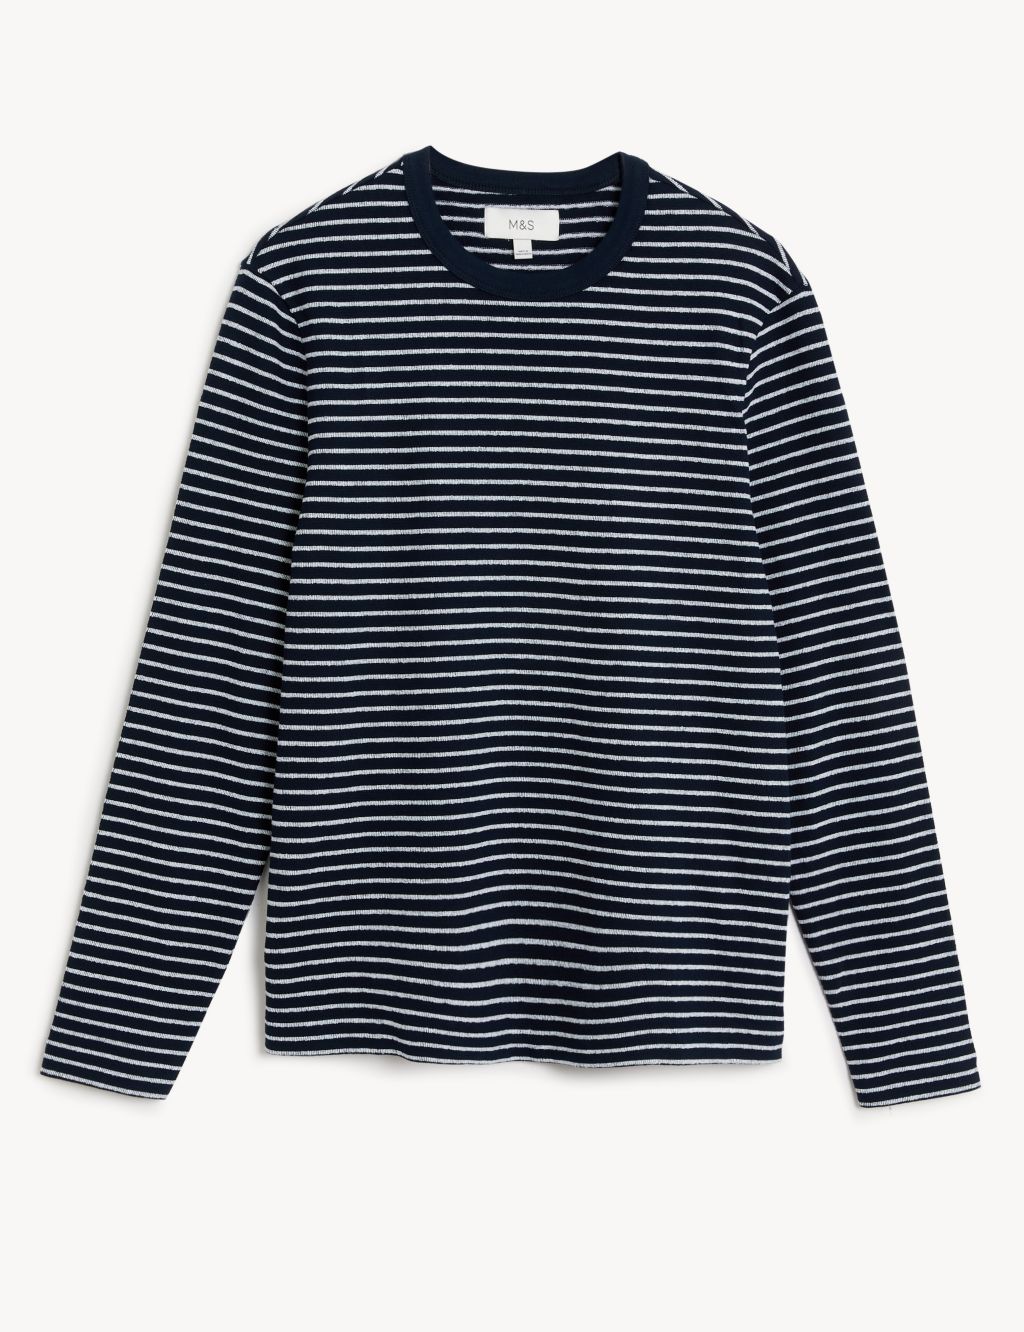 Pure Cotton Striped Long Sleeve T-Shirt image 2